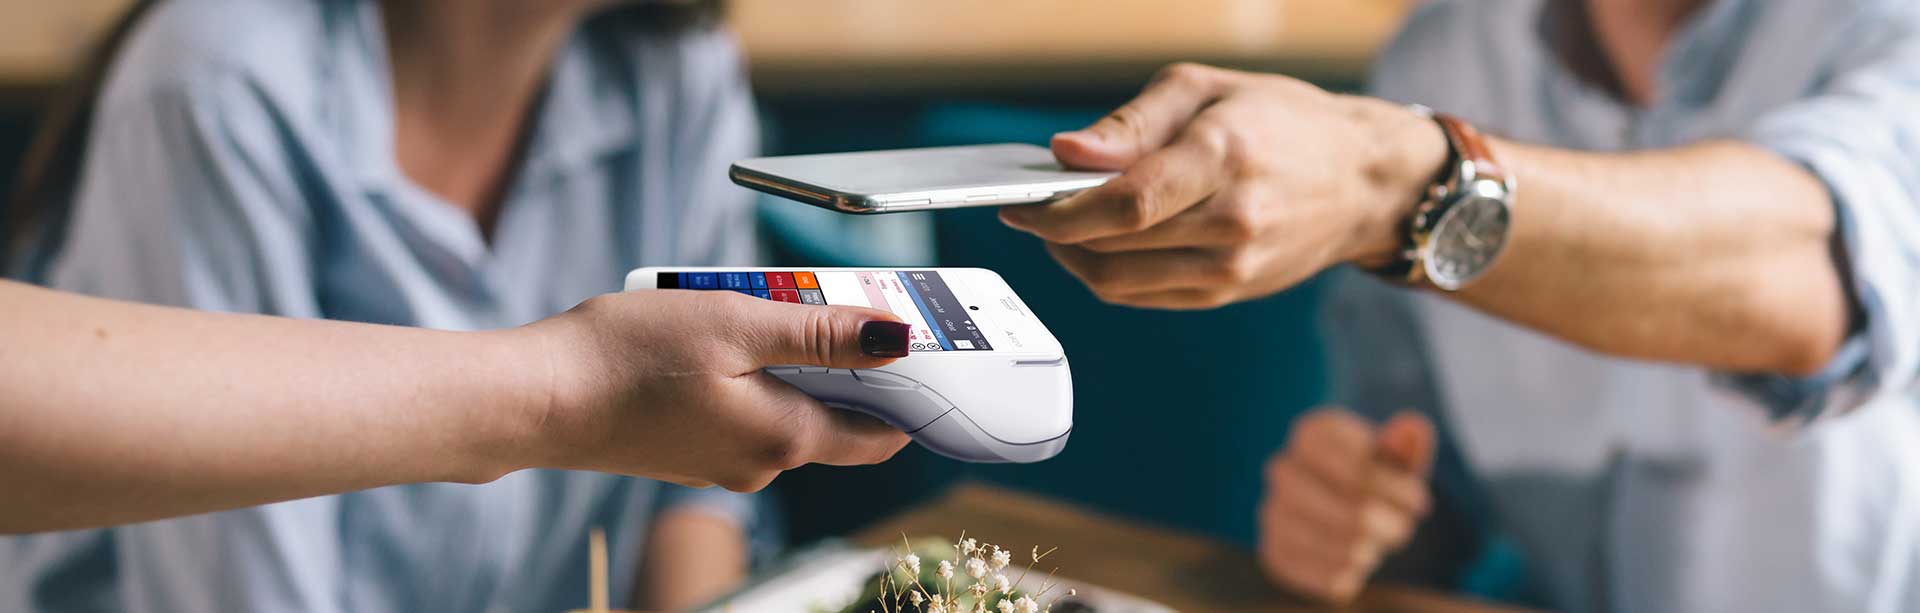 man paying for meal with phone | contactless pos